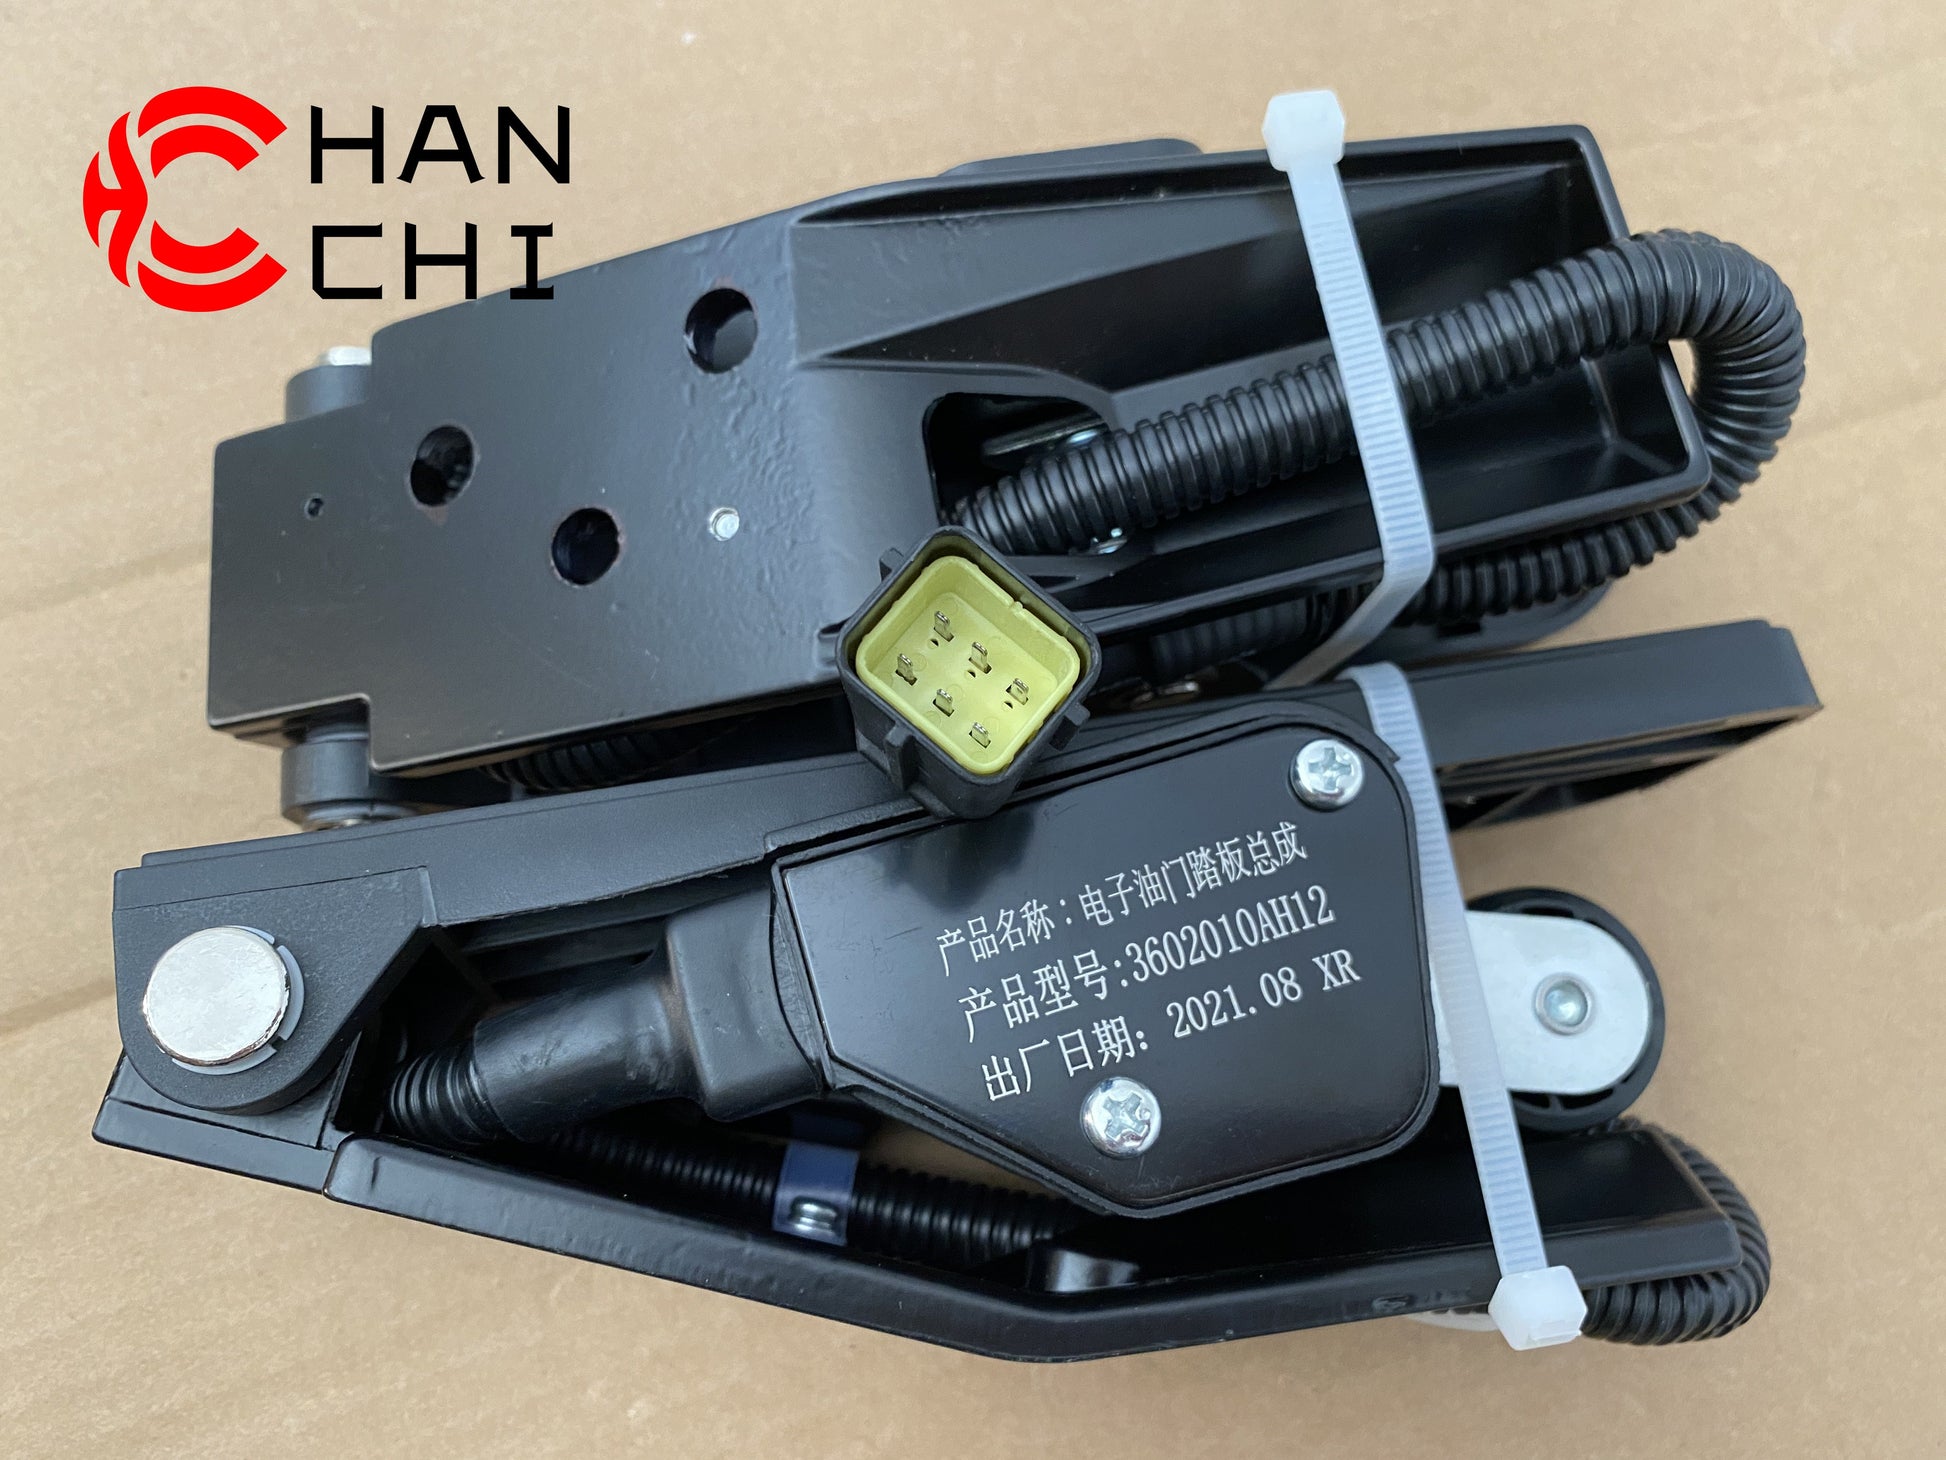 【Description】---☀Welcome to HANCHI☀---✔Good Quality✔Generally Applicability✔Competitive PriceEnjoy your shopping time↖（^ω^）↗【Features】Brand-New with High Quality for the Aftermarket.Totally mathced your need.**Stable Quality**High Precision**Easy Installation**【Specification】OEM：3602010AH12Material：ABSColor：blackOrigin：Made in ChinaWeight：1000g【Packing List】1* Electronic Accelerator Pedal 【More Service】 We can provide OEM service We can Be your one-step solution for Auto Parts We can provide tec